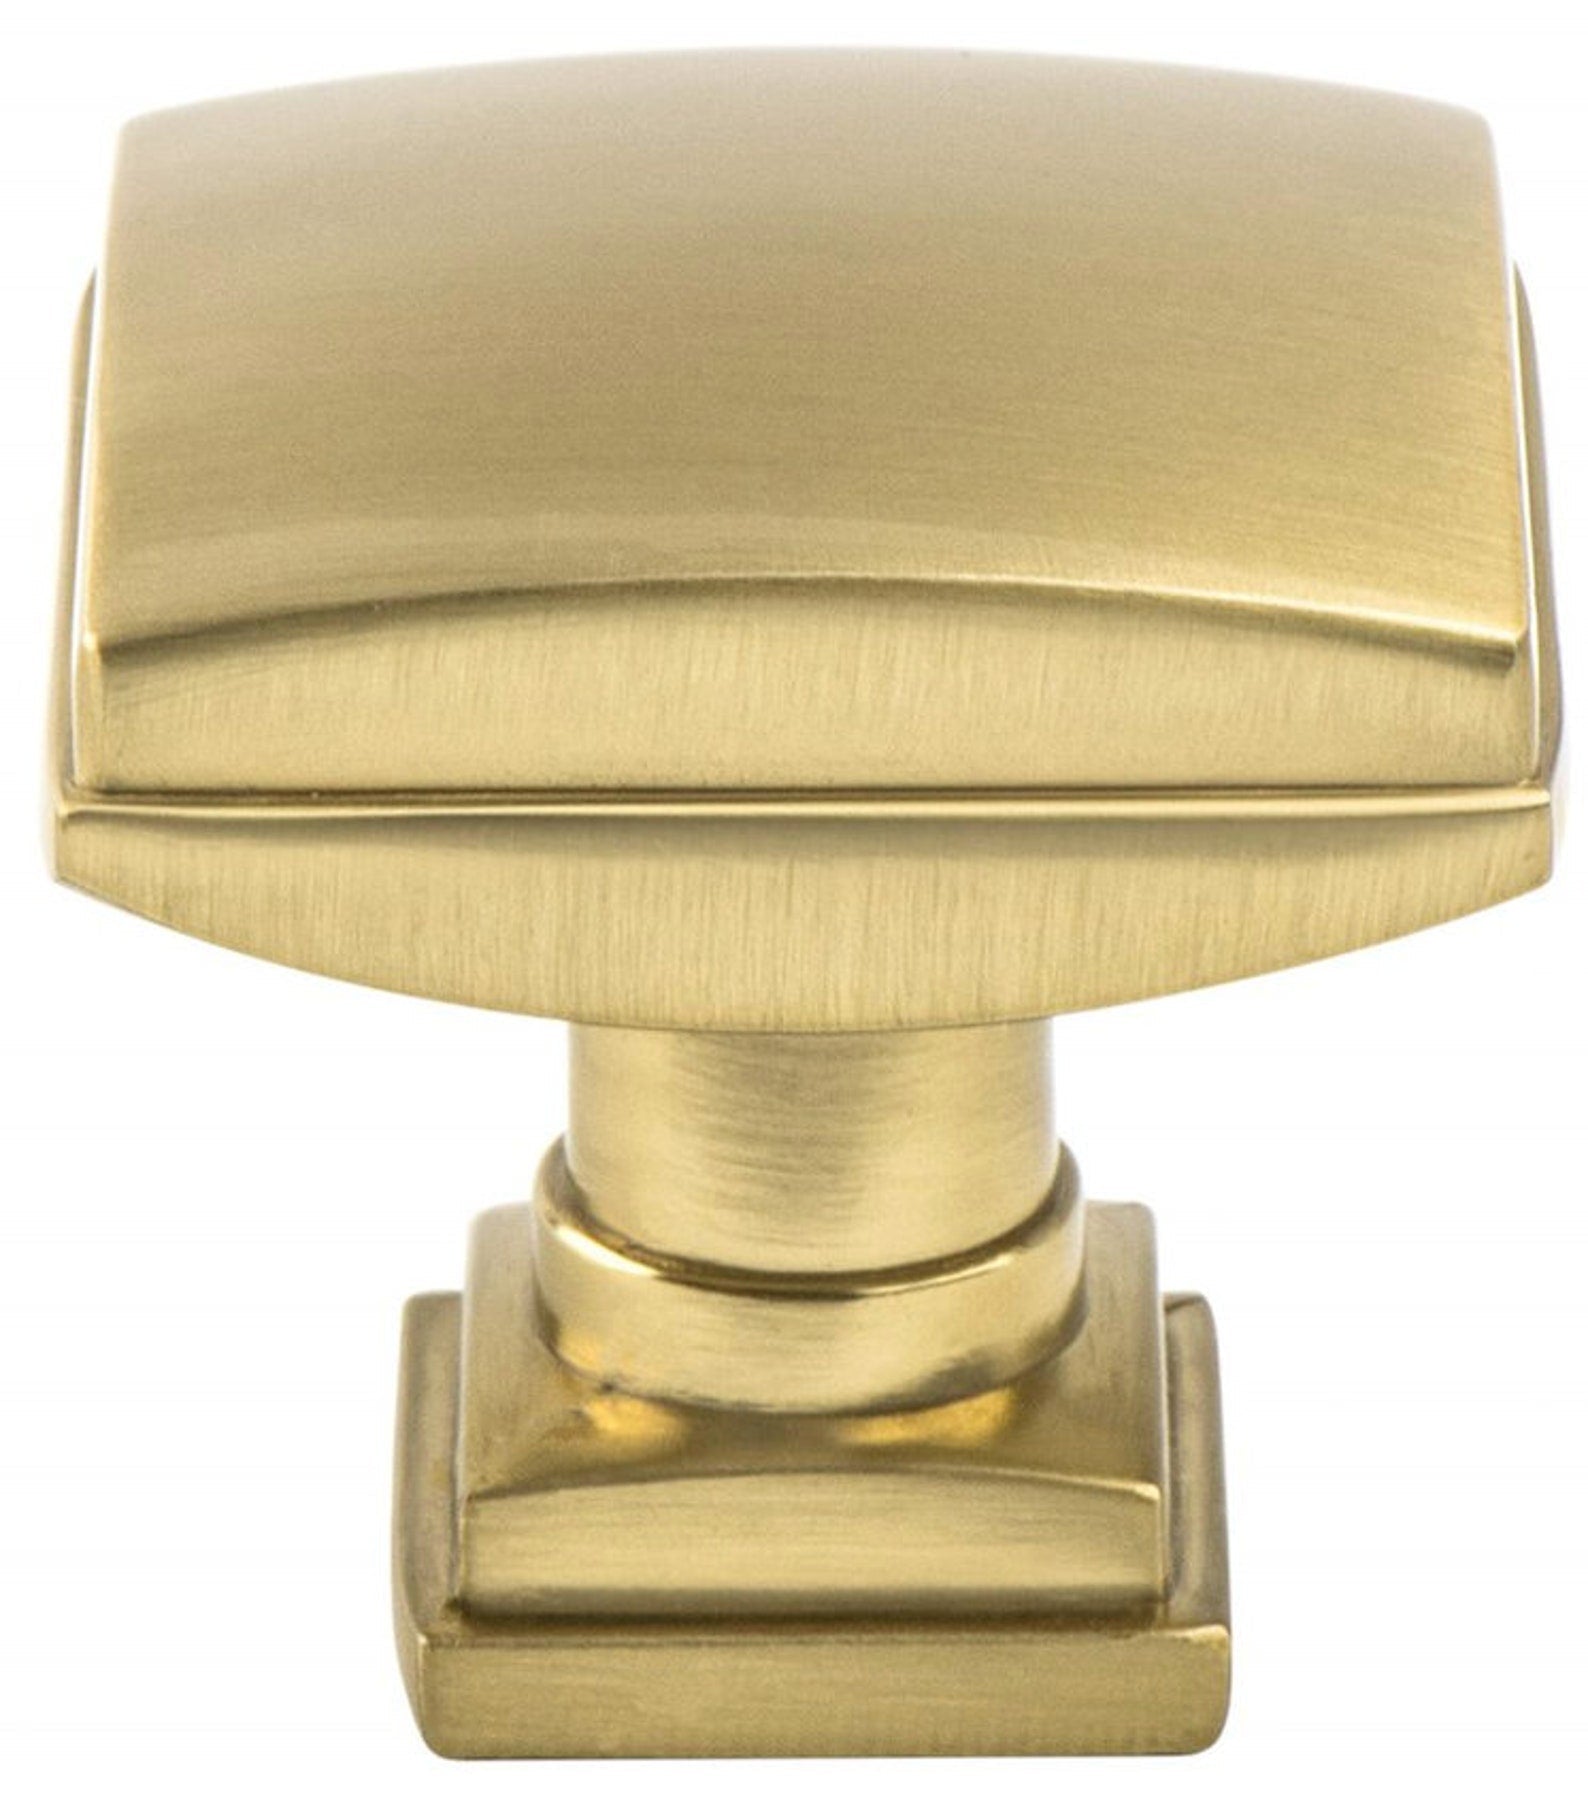 Kelly No.2 Cabinet Knob and Drawer Pulls in Satin Brass - Forge Hardware Studio